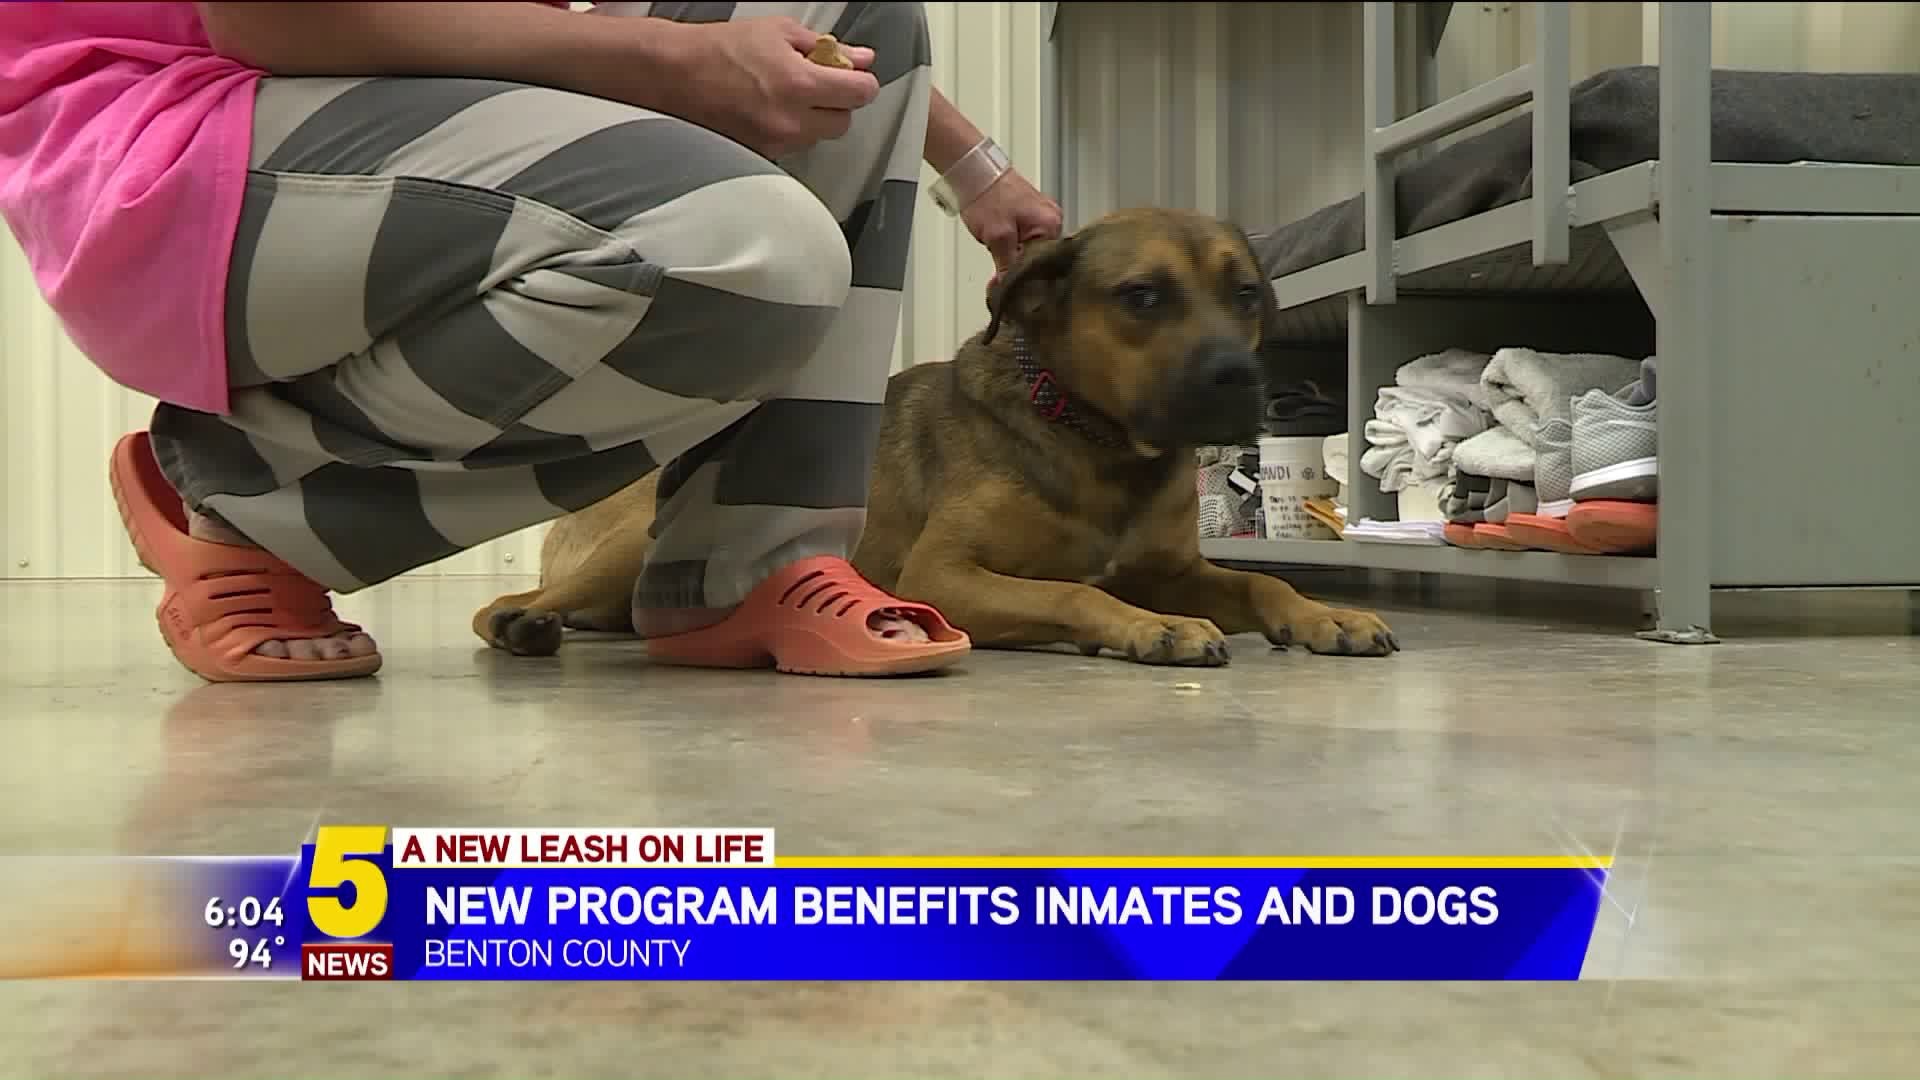 New Program Benefits Inmates And Dogs